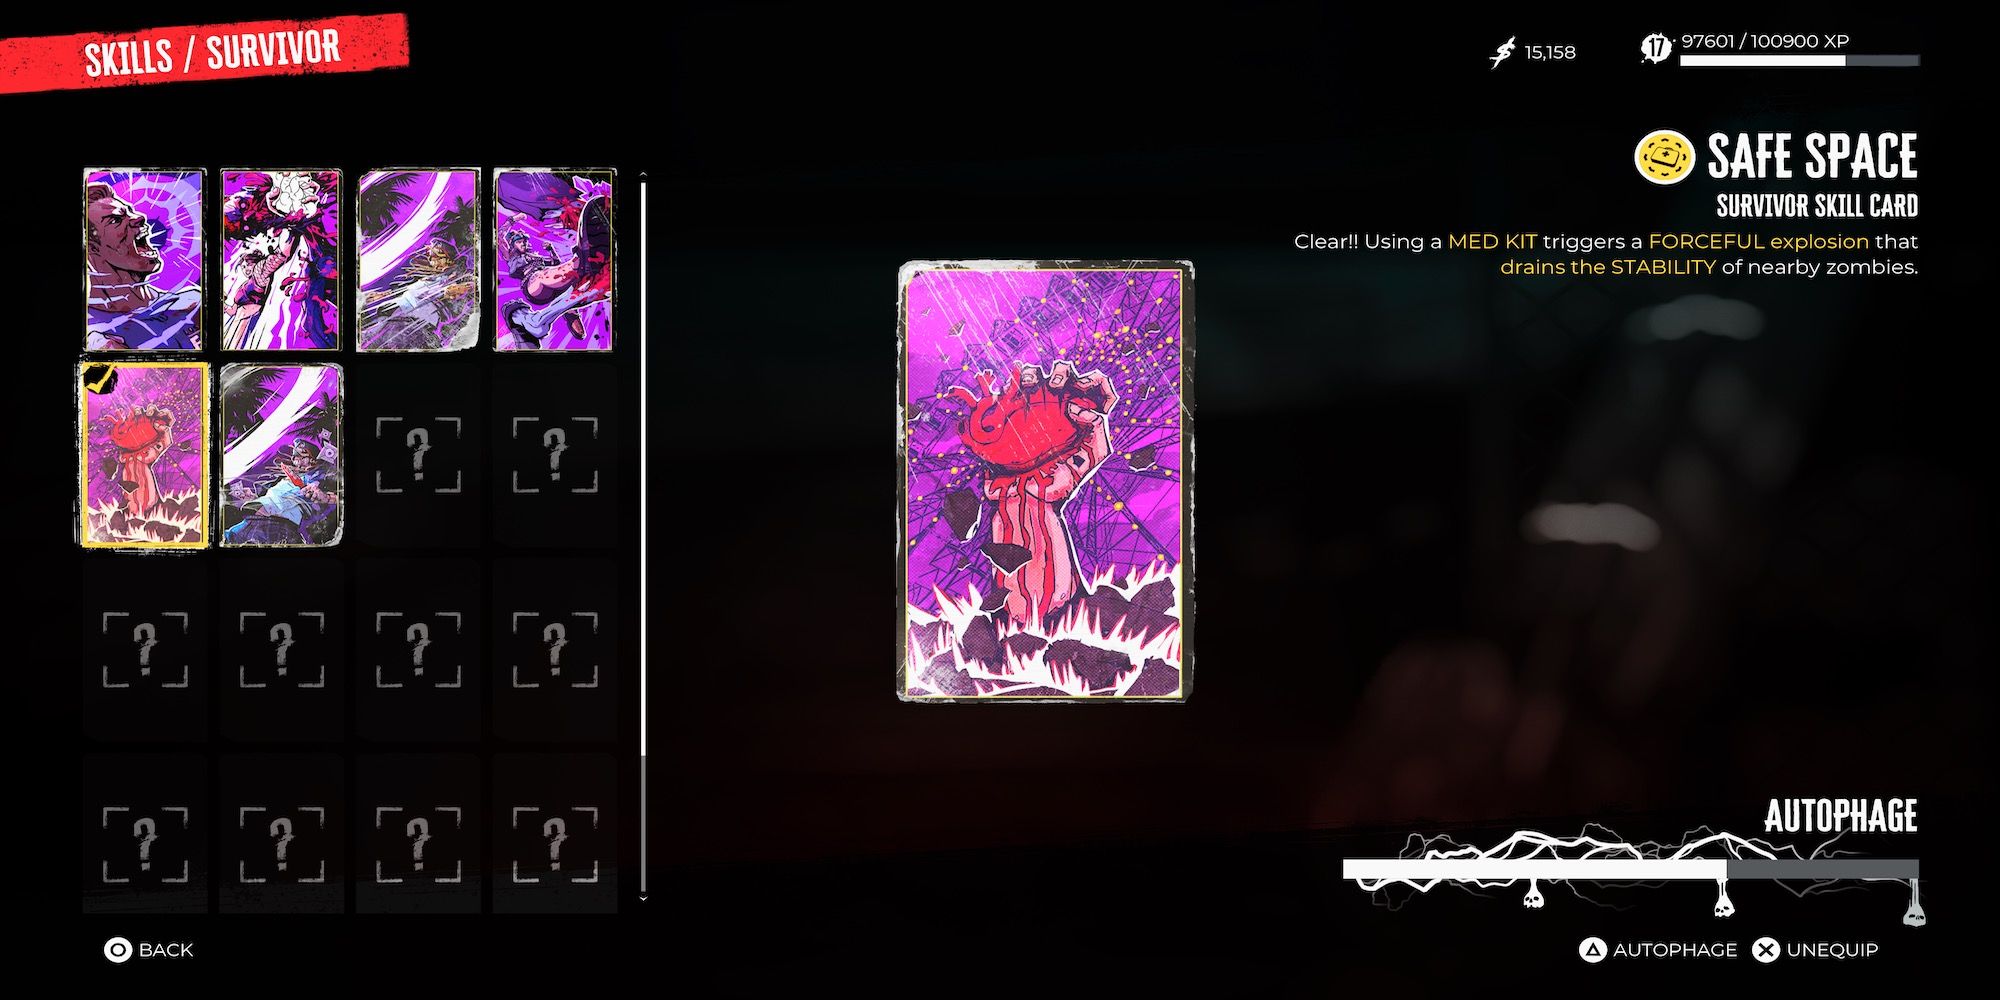 Safe Space skill card in Dead Island 2